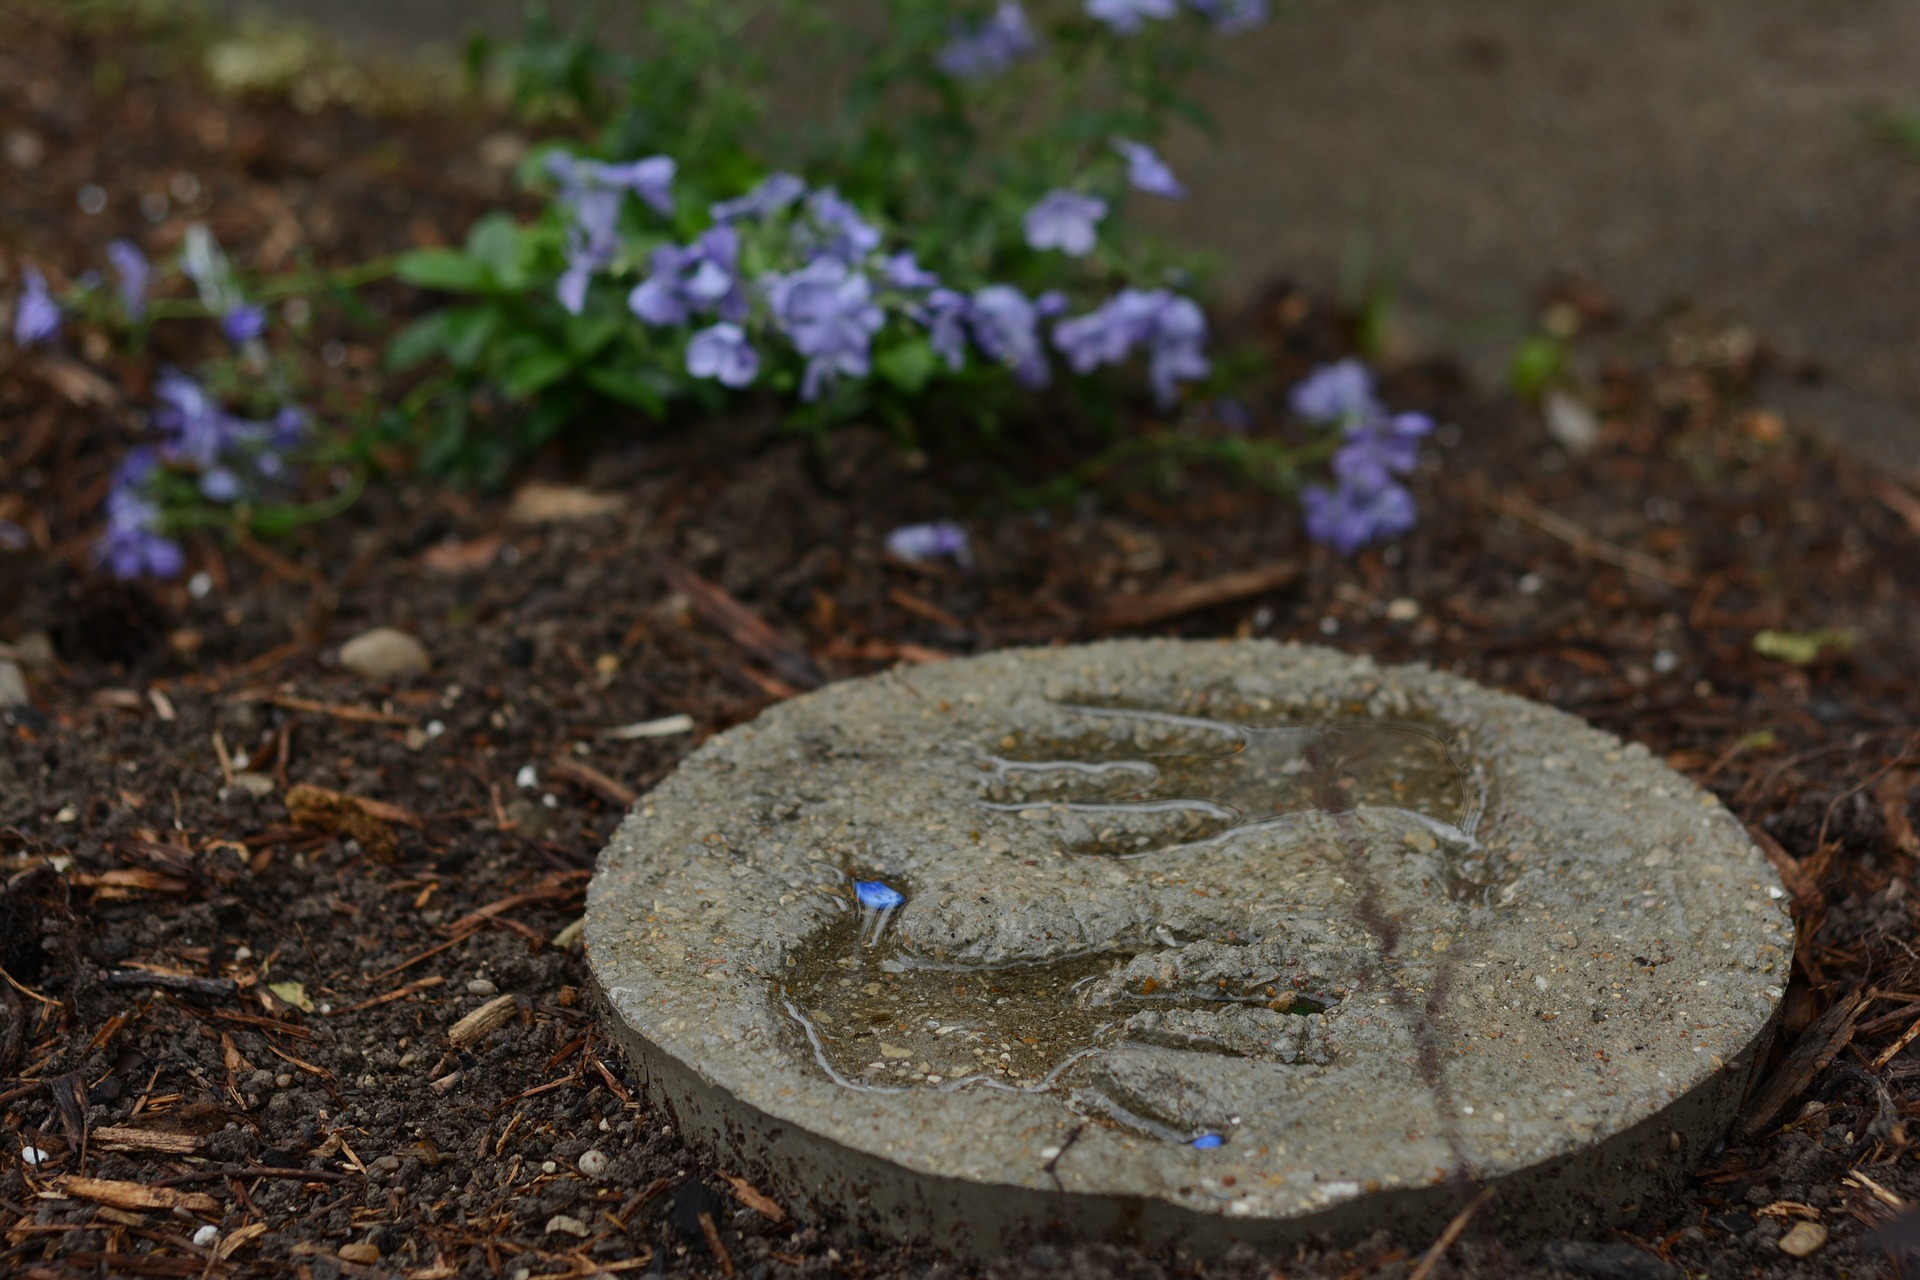 Handprints molded into a stepping stone in a garden.